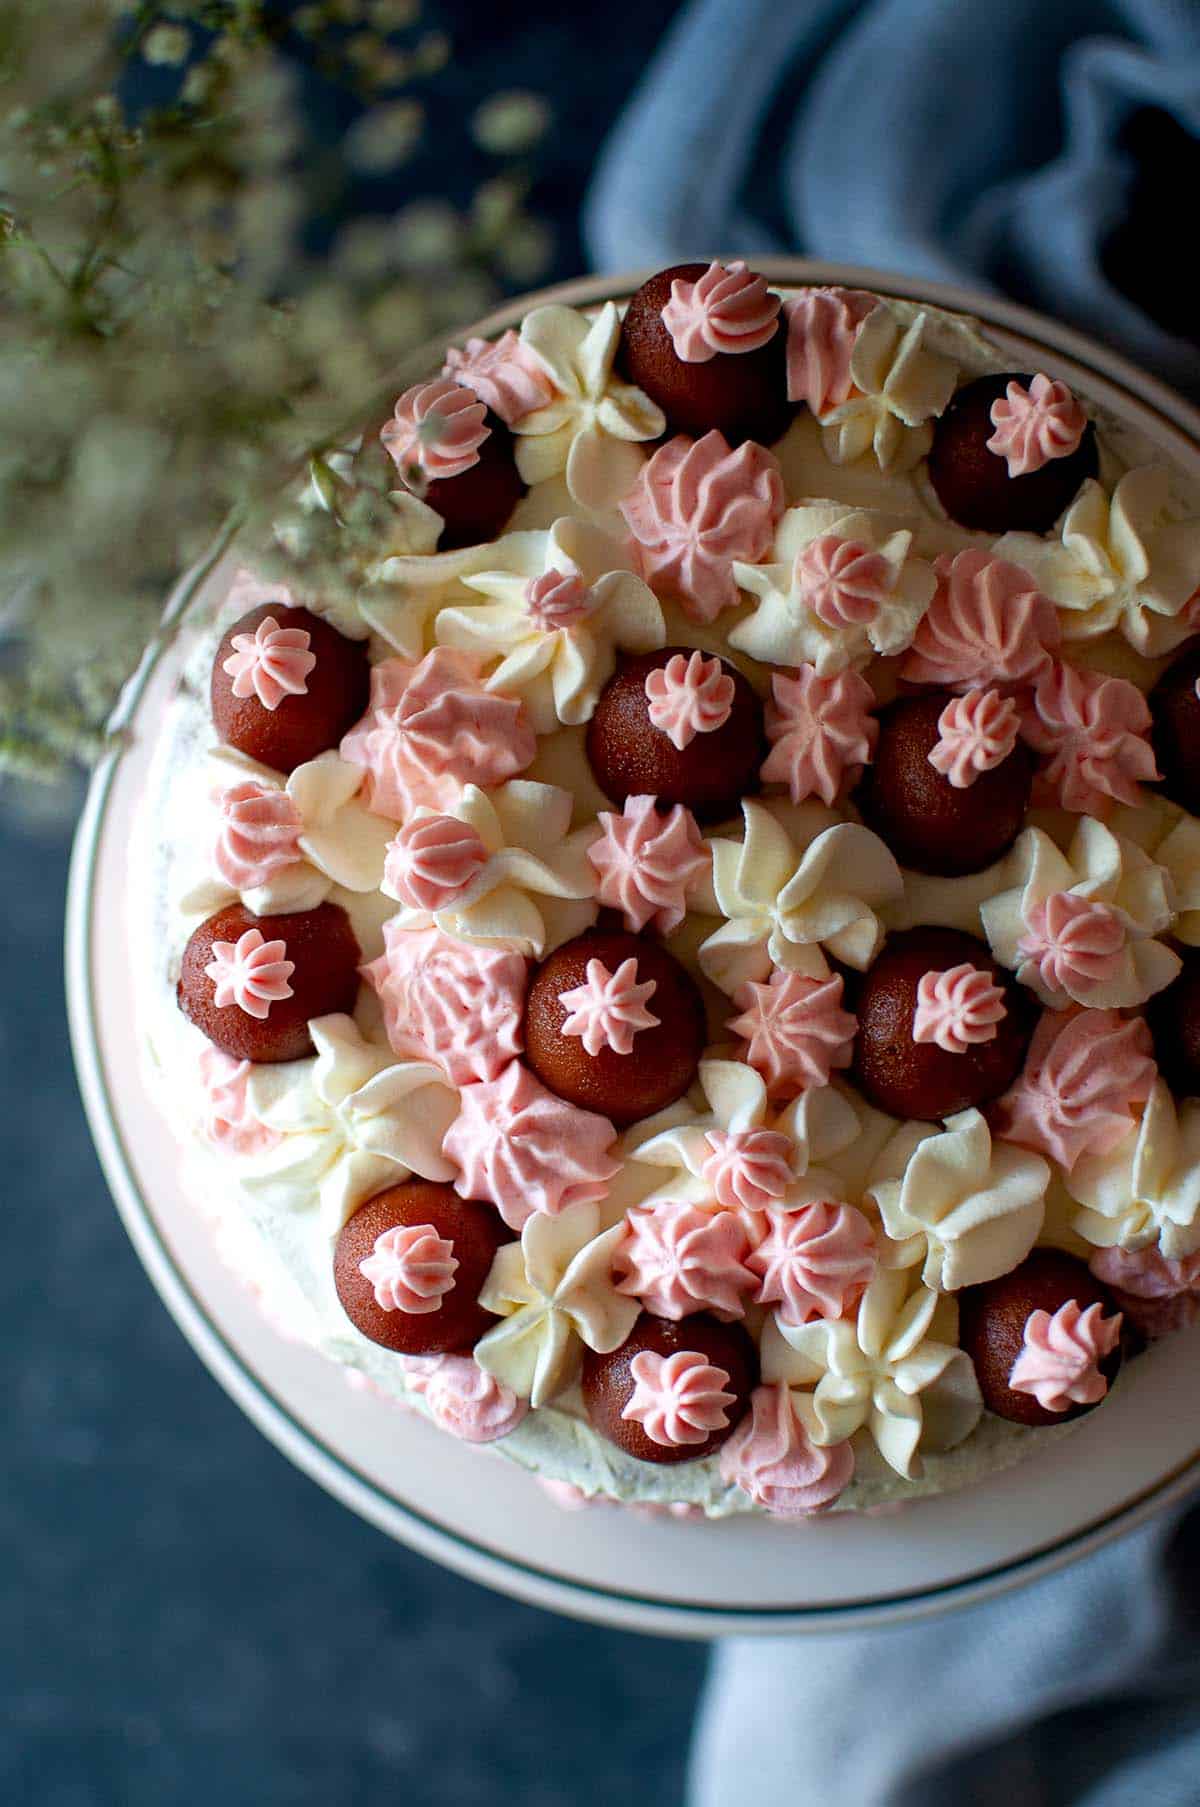 Top view of a decorated cake with jamun and frosting